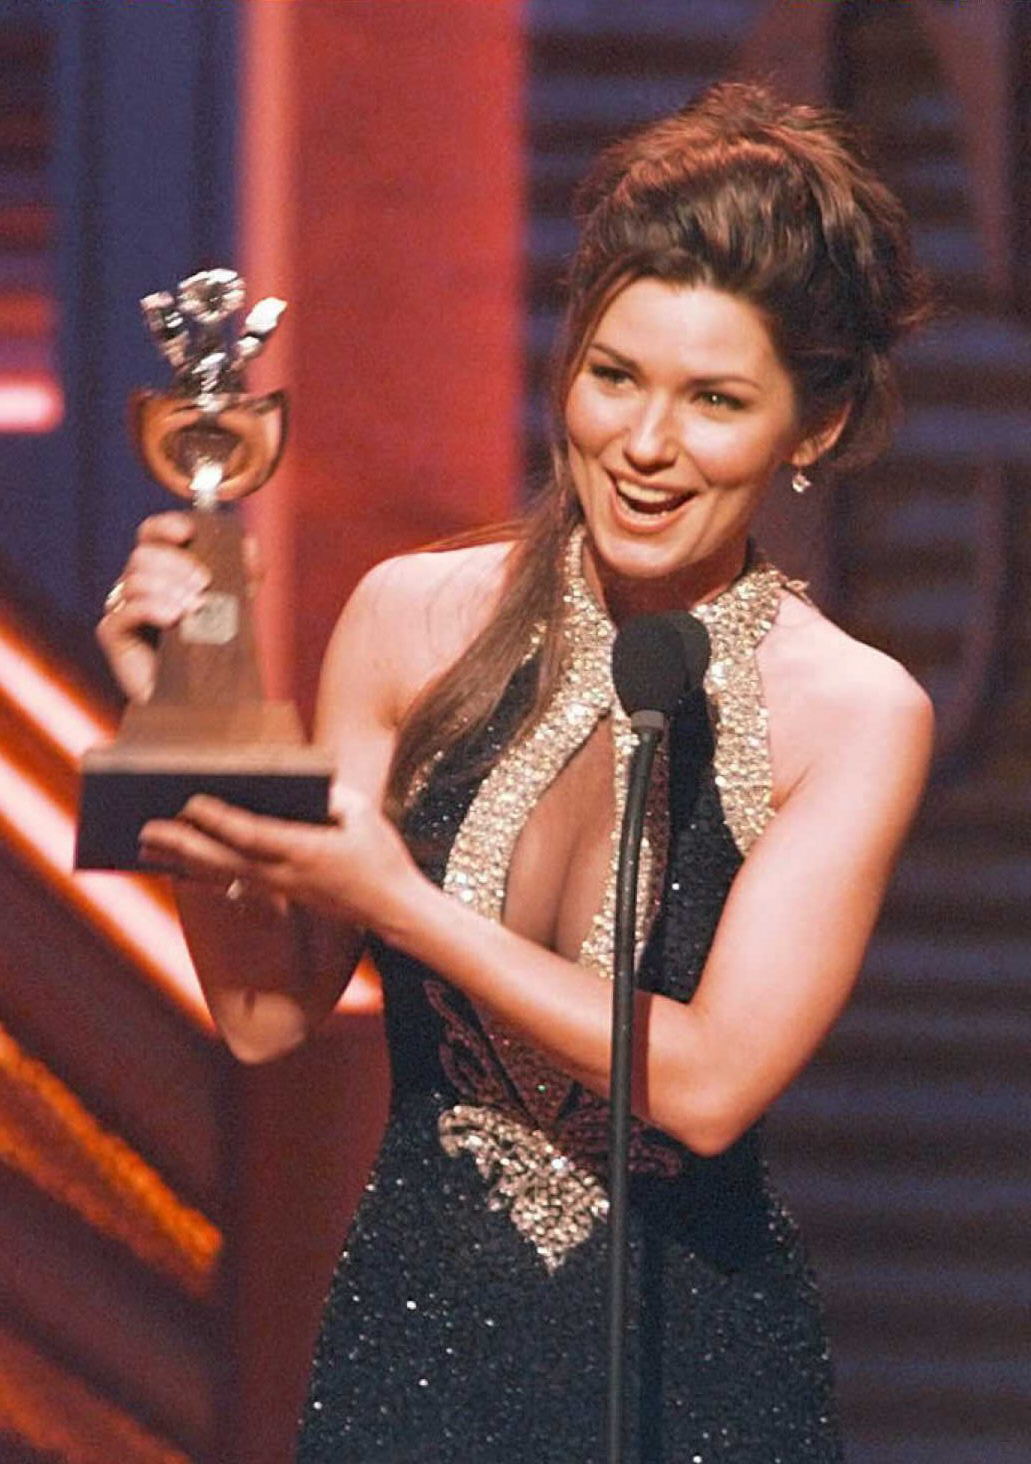 Shania Twain aux 31 Annual Country Music Awards le 19 avril 1996 | Source : Getty Images